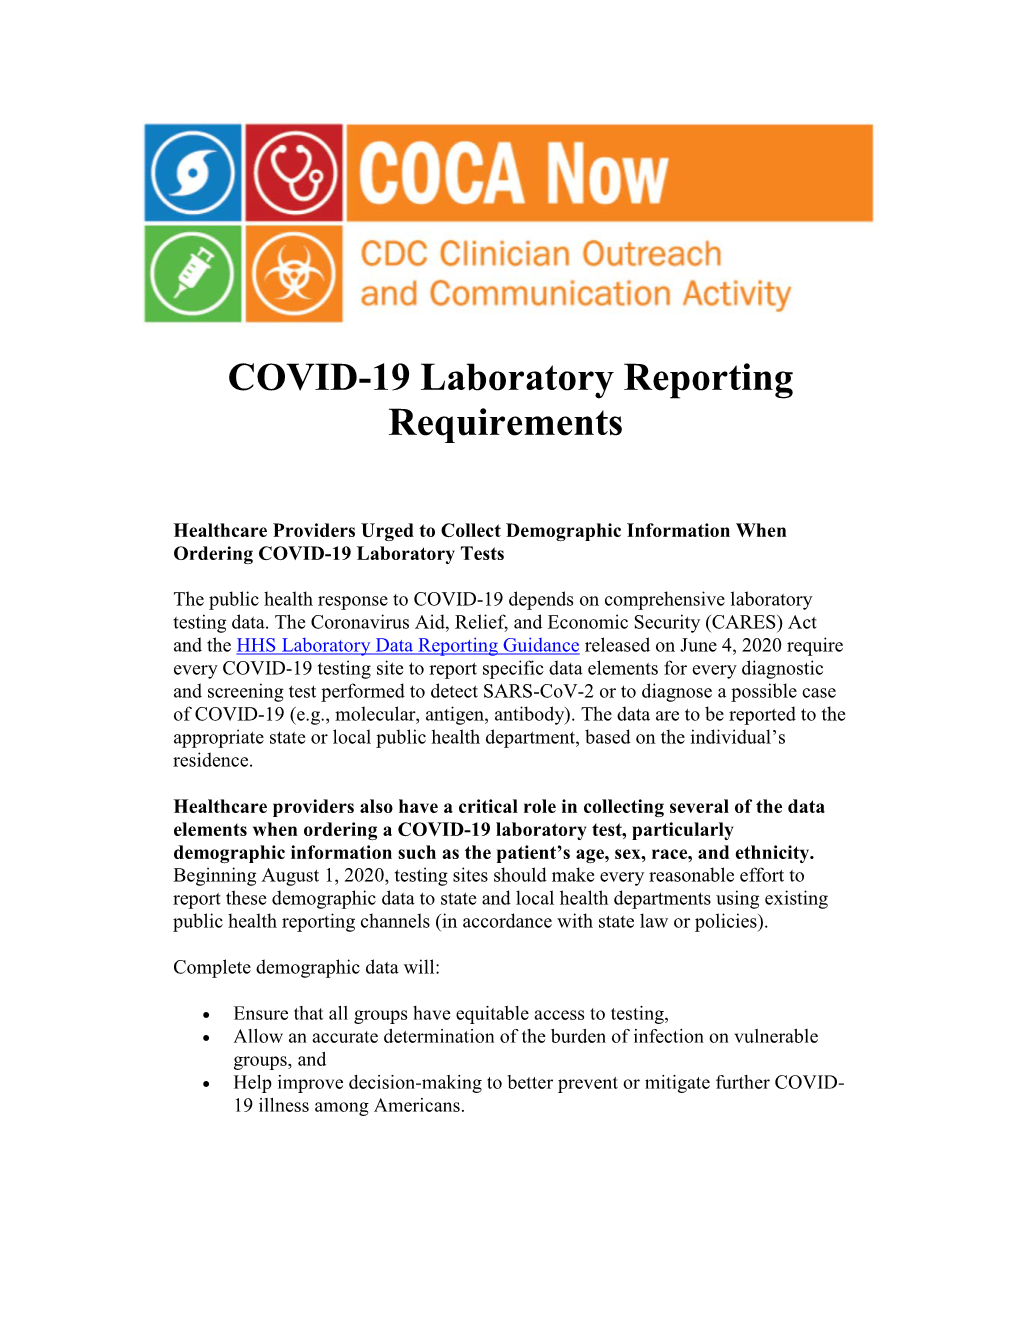 COVID-19 Laboratory Reporting Requirements